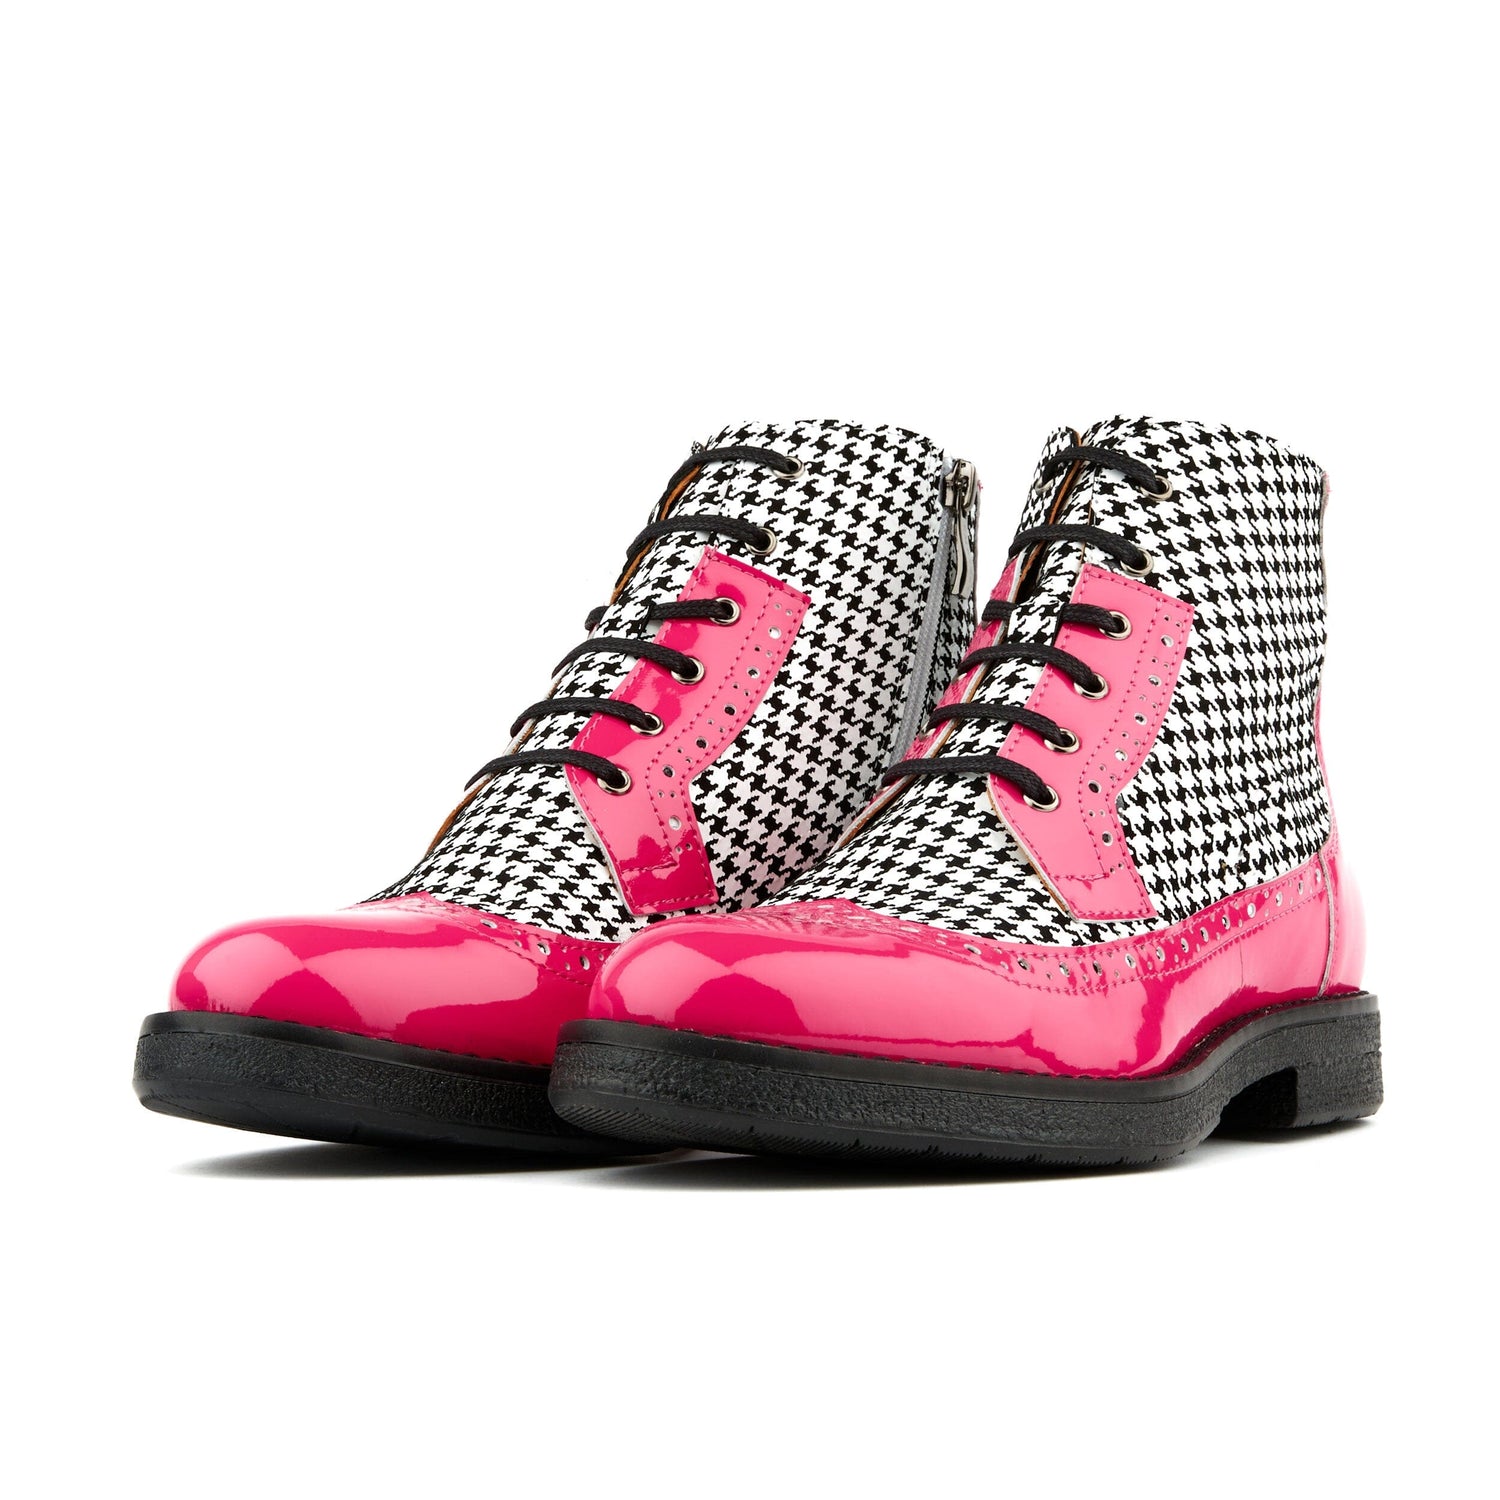 Hatter - Pink & Black Houndstooth Womens Ankle Boots Embassy London 